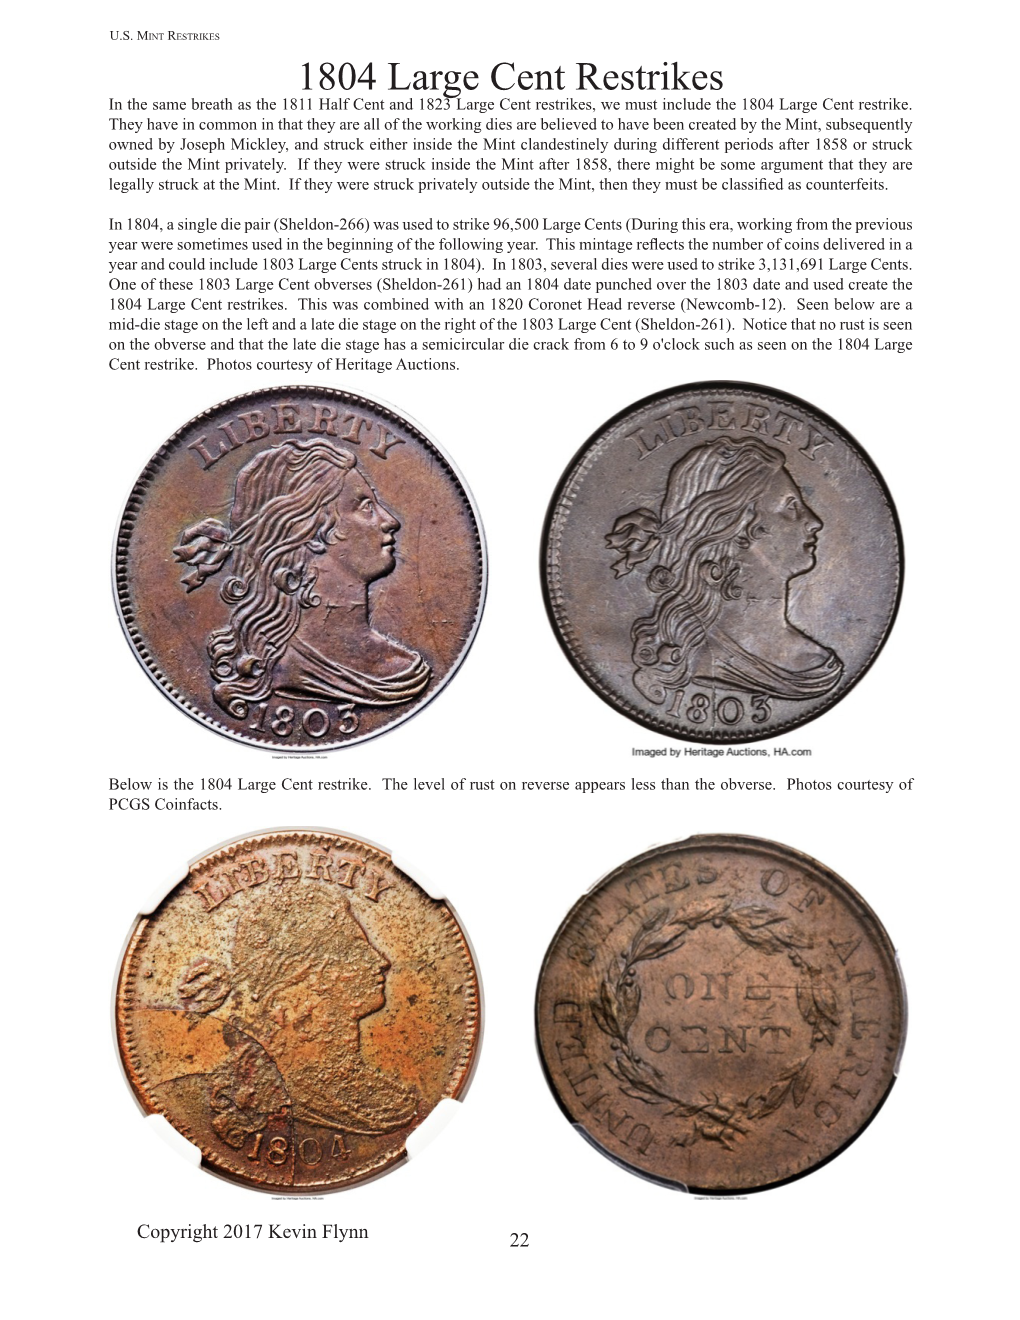 1804 Large Cent Restrikes in the Same Breath As the 1811 Half Cent and 1823 Large Cent Restrikes, We Must Include the 1804 Large Cent Restrike